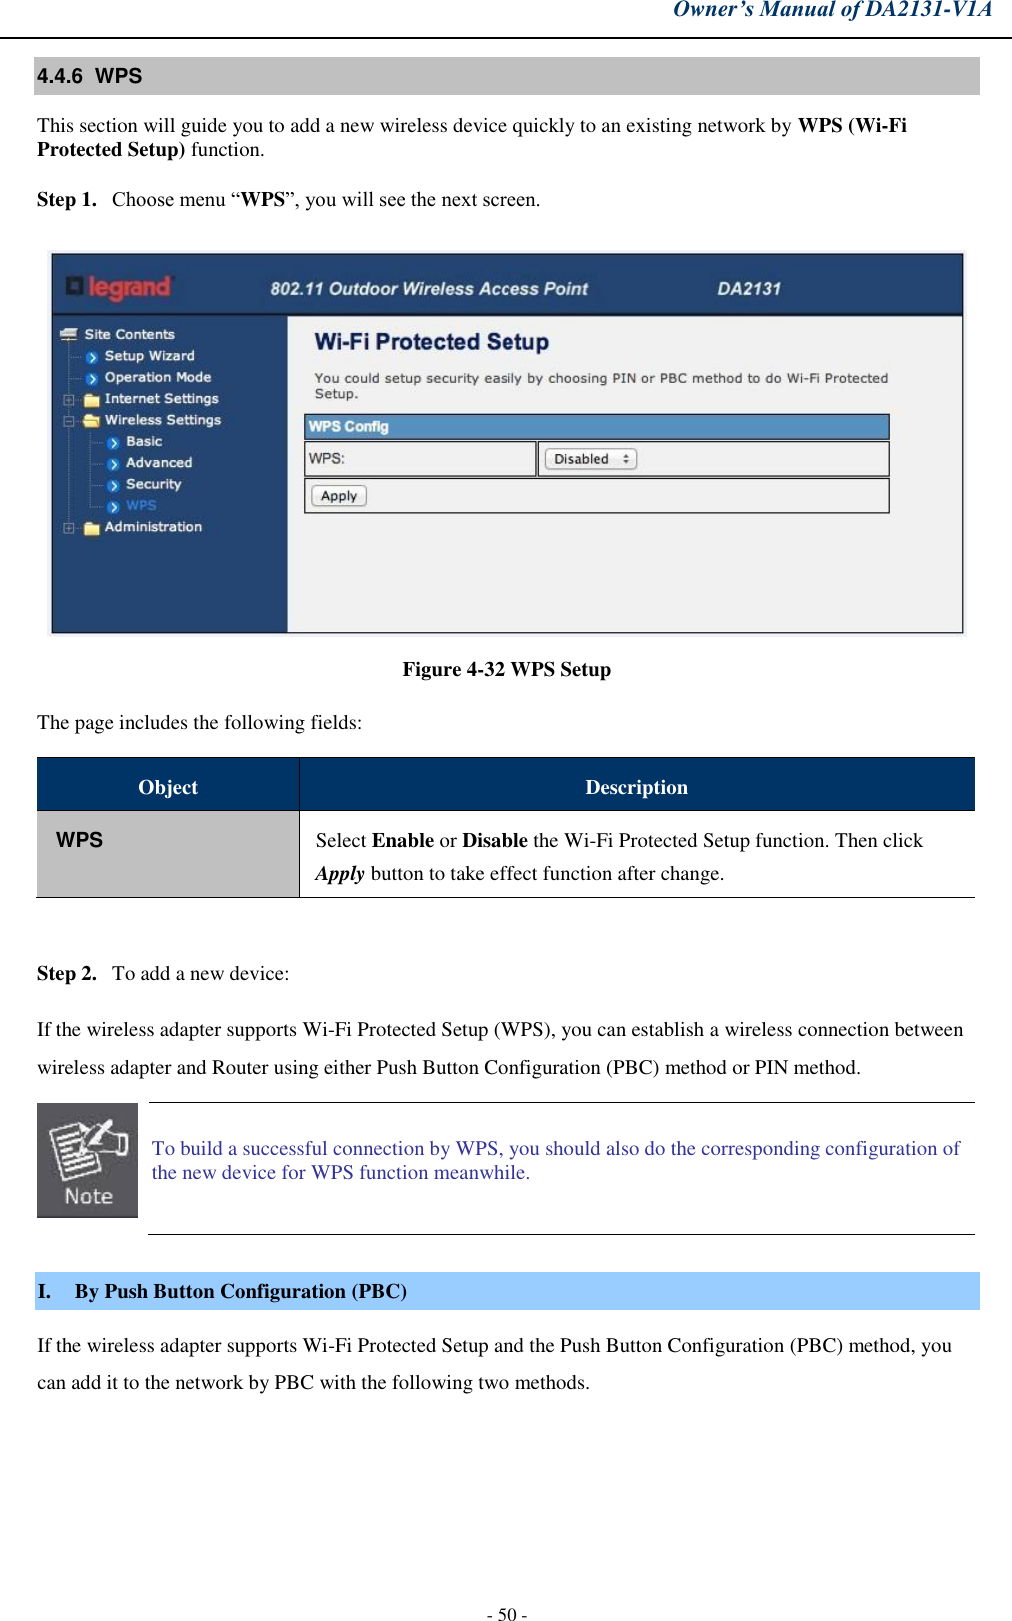 Owner’s Manual of DA2131-V1A - 50 - 4.4.6  WPS This section will guide you to add a new wireless device quickly to an existing network by WPS (Wi-Fi Protected Setup) function.  Step 1. Choose menu “WPS”, you will see the next screen. Figure 4-32 WPS Setup The page includes the following fields: Object Description WPS Select Enable or Disable the Wi-Fi Protected Setup function. Then click Apply button to take effect function after change. Step 2. To add a new device: If the wireless adapter supports Wi-Fi Protected Setup (WPS), you can establish a wireless connection between wireless adapter and Router using either Push Button Configuration (PBC) method or PIN method. To build a successful connection by WPS, you should also do the corresponding configuration of the new device for WPS function meanwhile. I. By Push Button Configuration (PBC) If the wireless adapter supports Wi-Fi Protected Setup and the Push Button Configuration (PBC) method, you can add it to the network by PBC with the following two methods. 